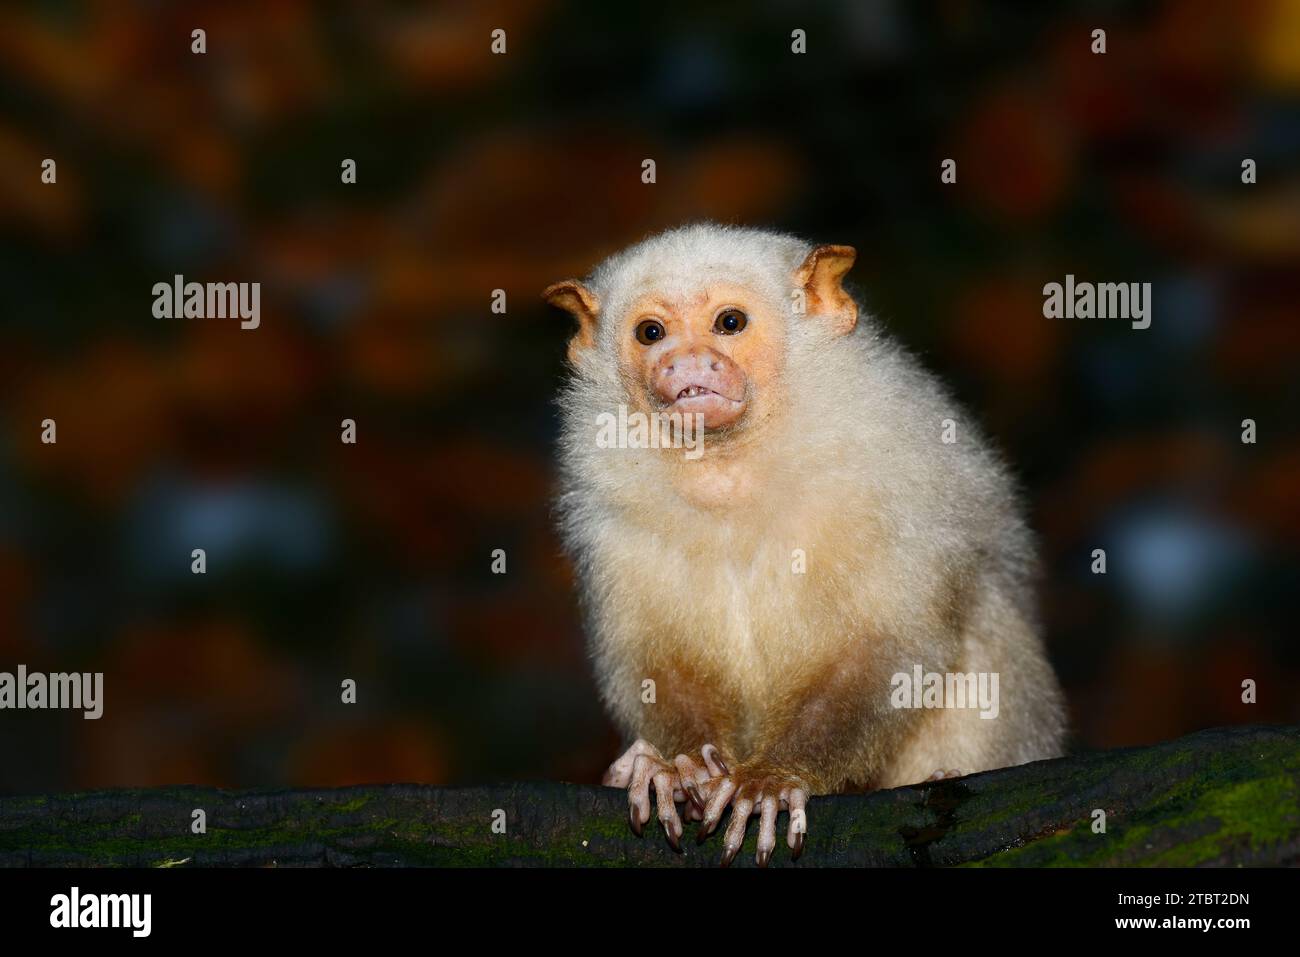 Silver monkey or silver marmoset (Mico argentatus, Callithrix argentata), captive, occurrence in Brazil Stock Photo